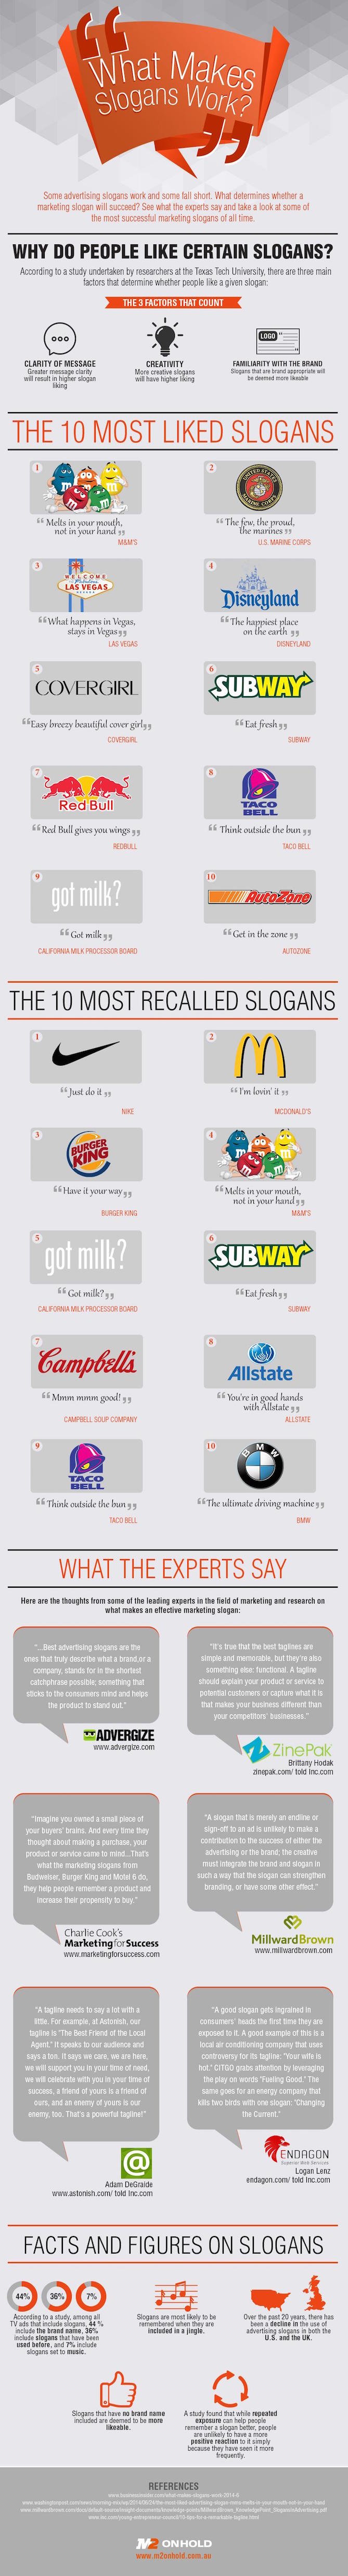 What Makes a Slogan Successful? [Infographic]